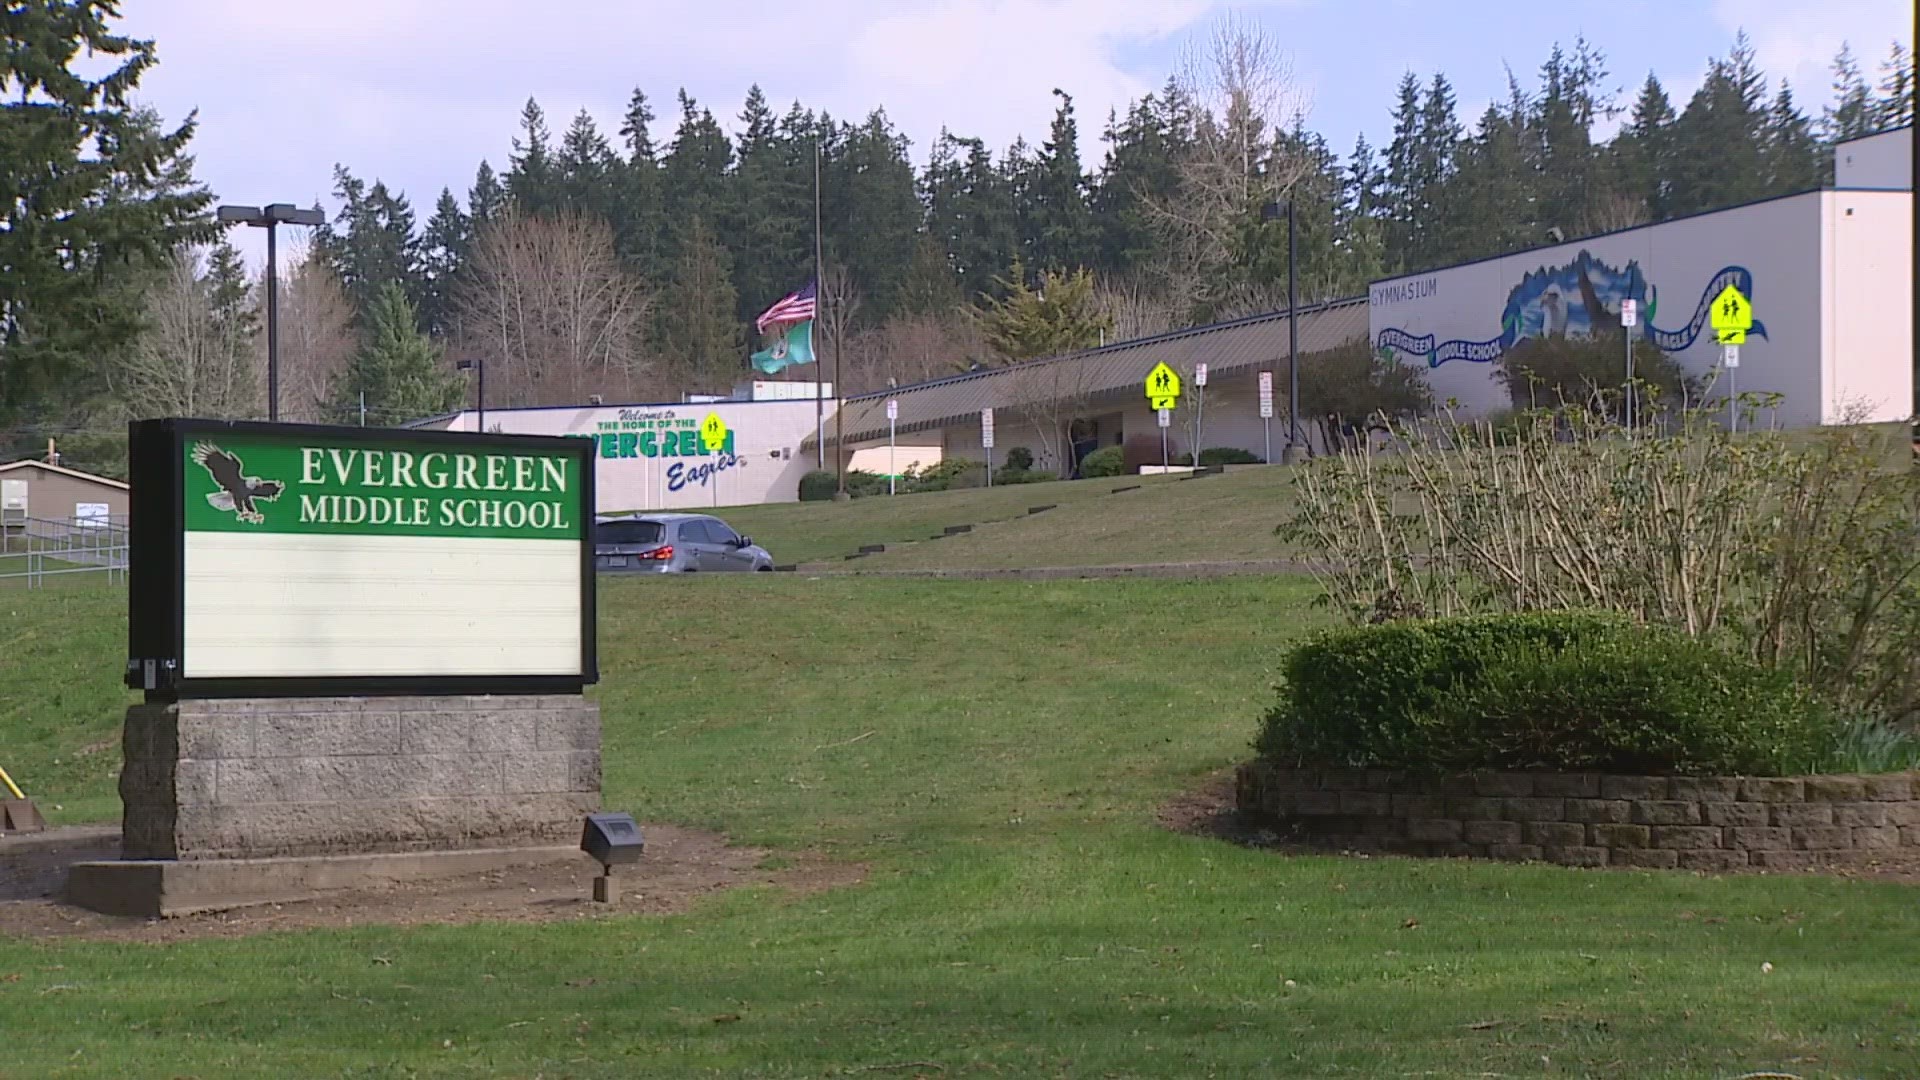 The Lake Washington School District said it is currently evaluating its partnerships with law enforcement and overall school safety staffing levels.